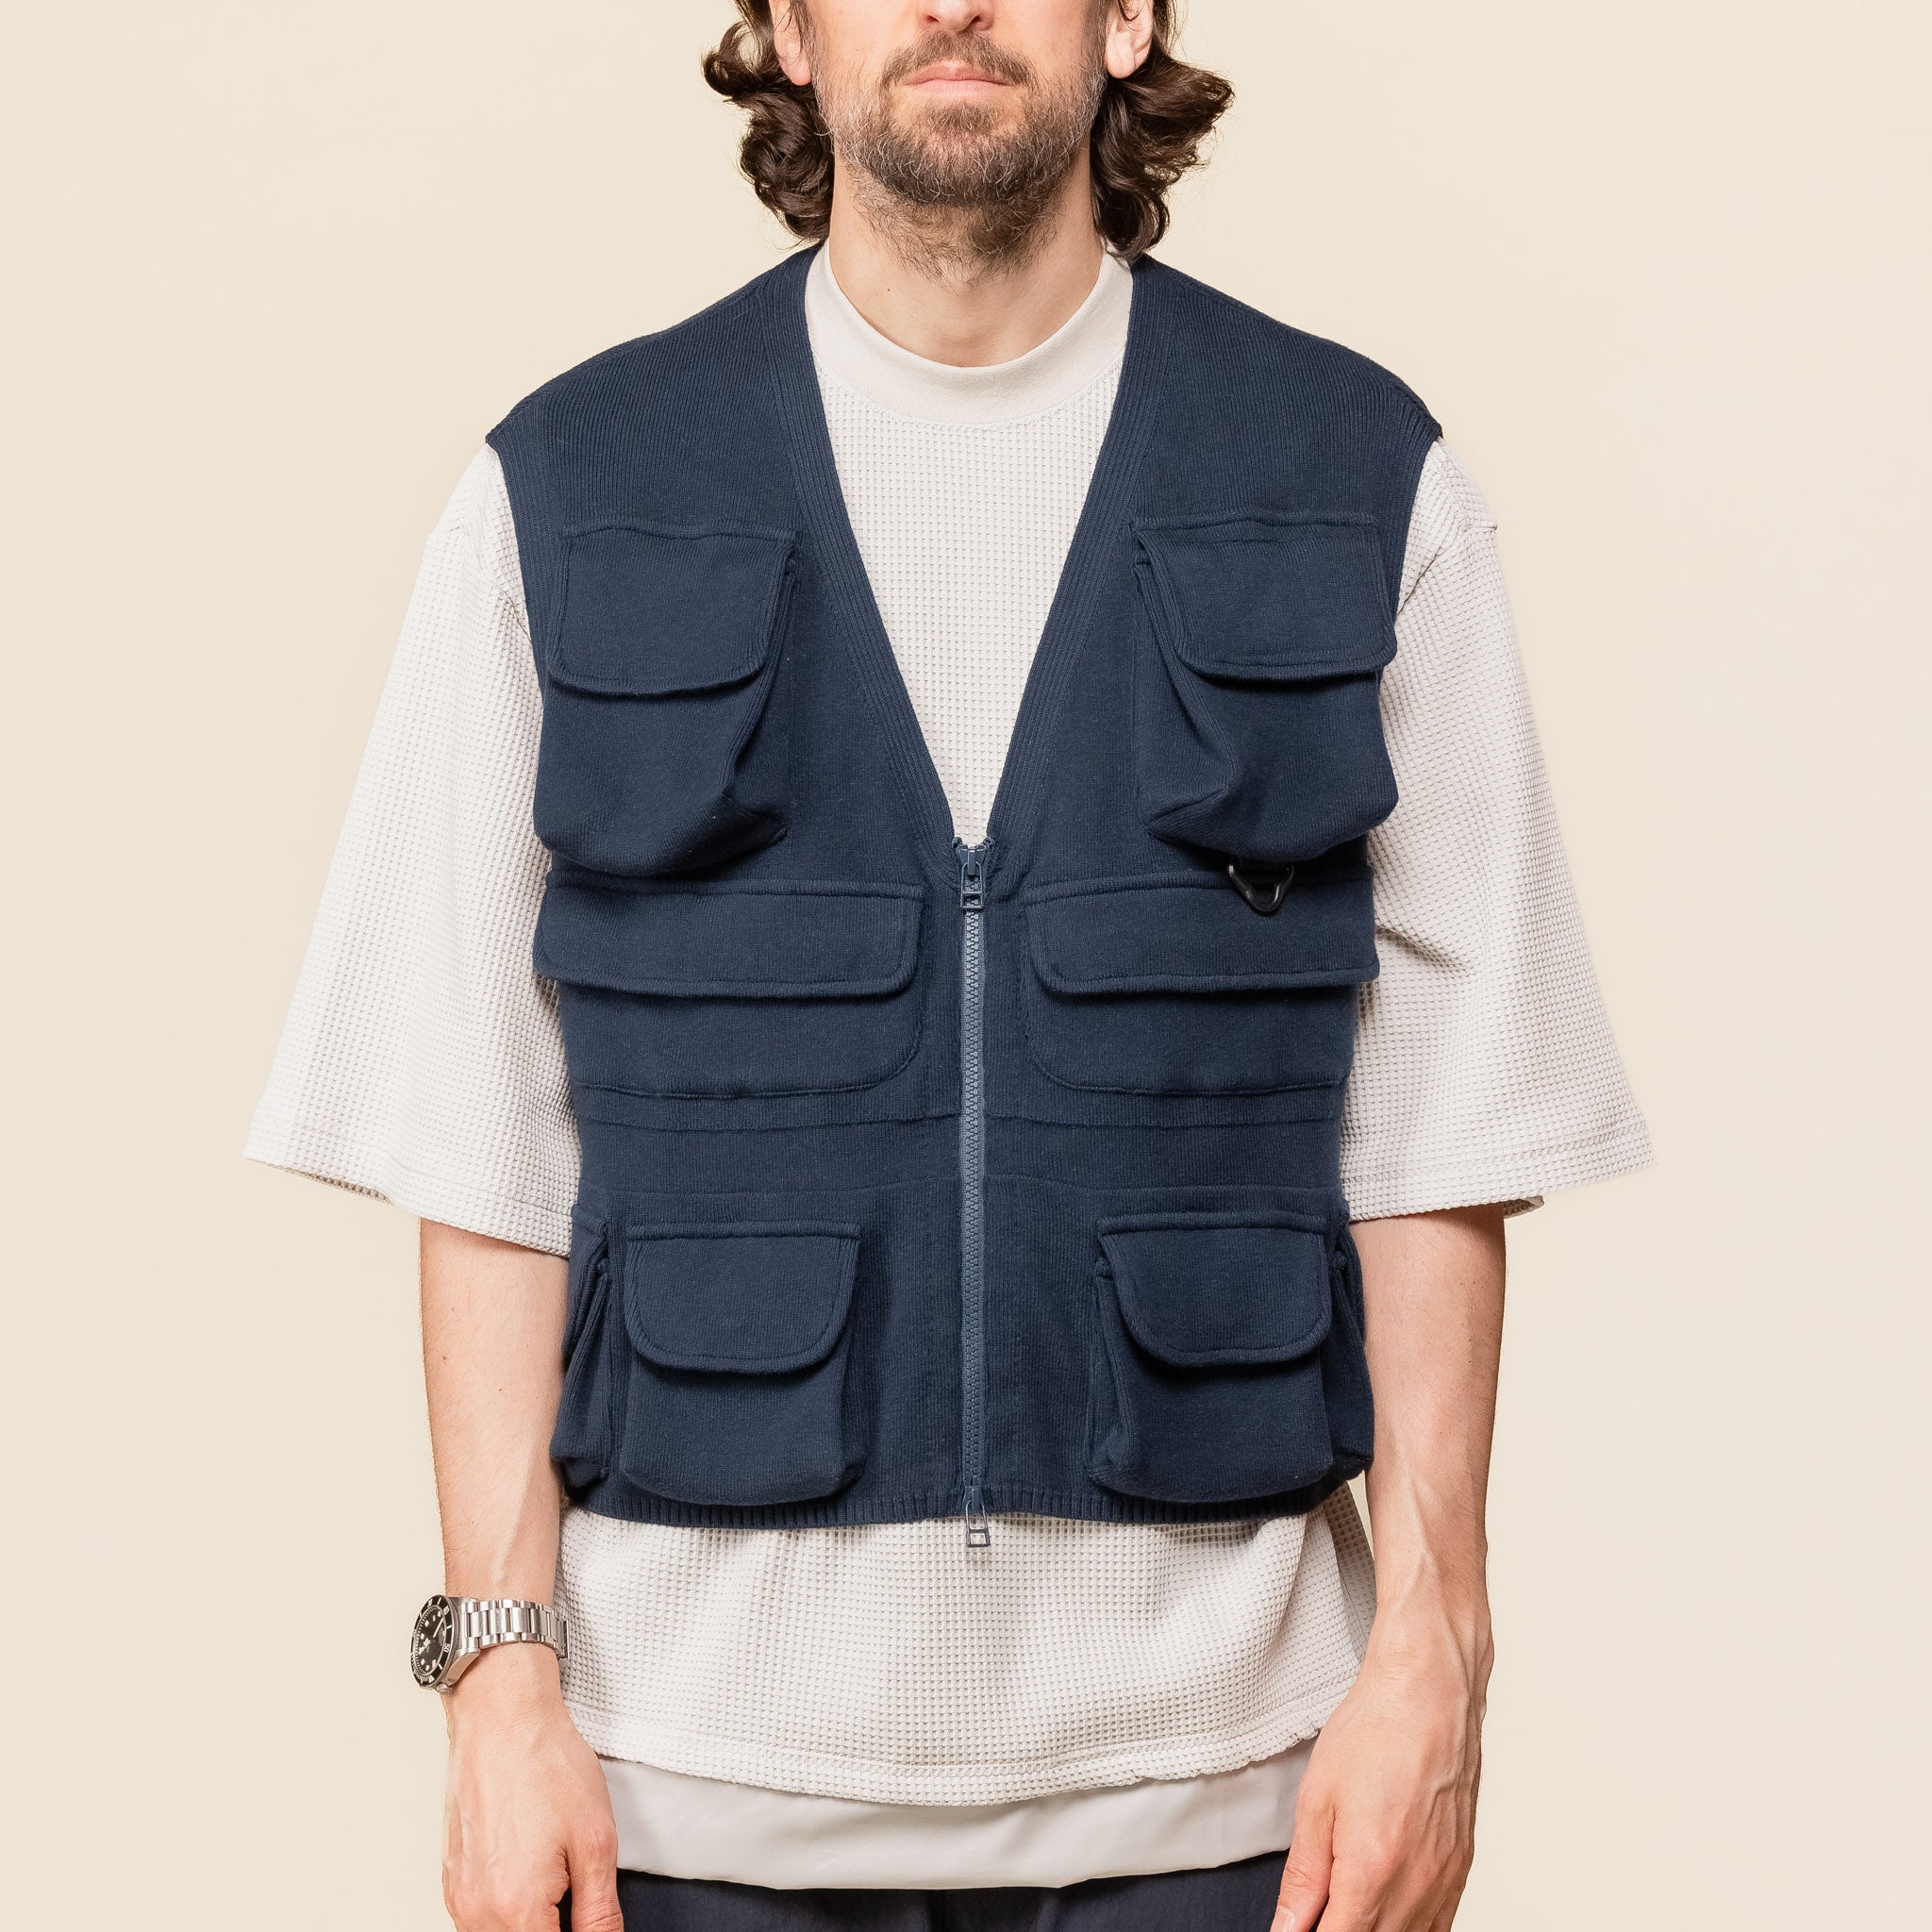 MW-KT24103 Meanswhile - Cotton Knit Luggage Vest - Navy Blue